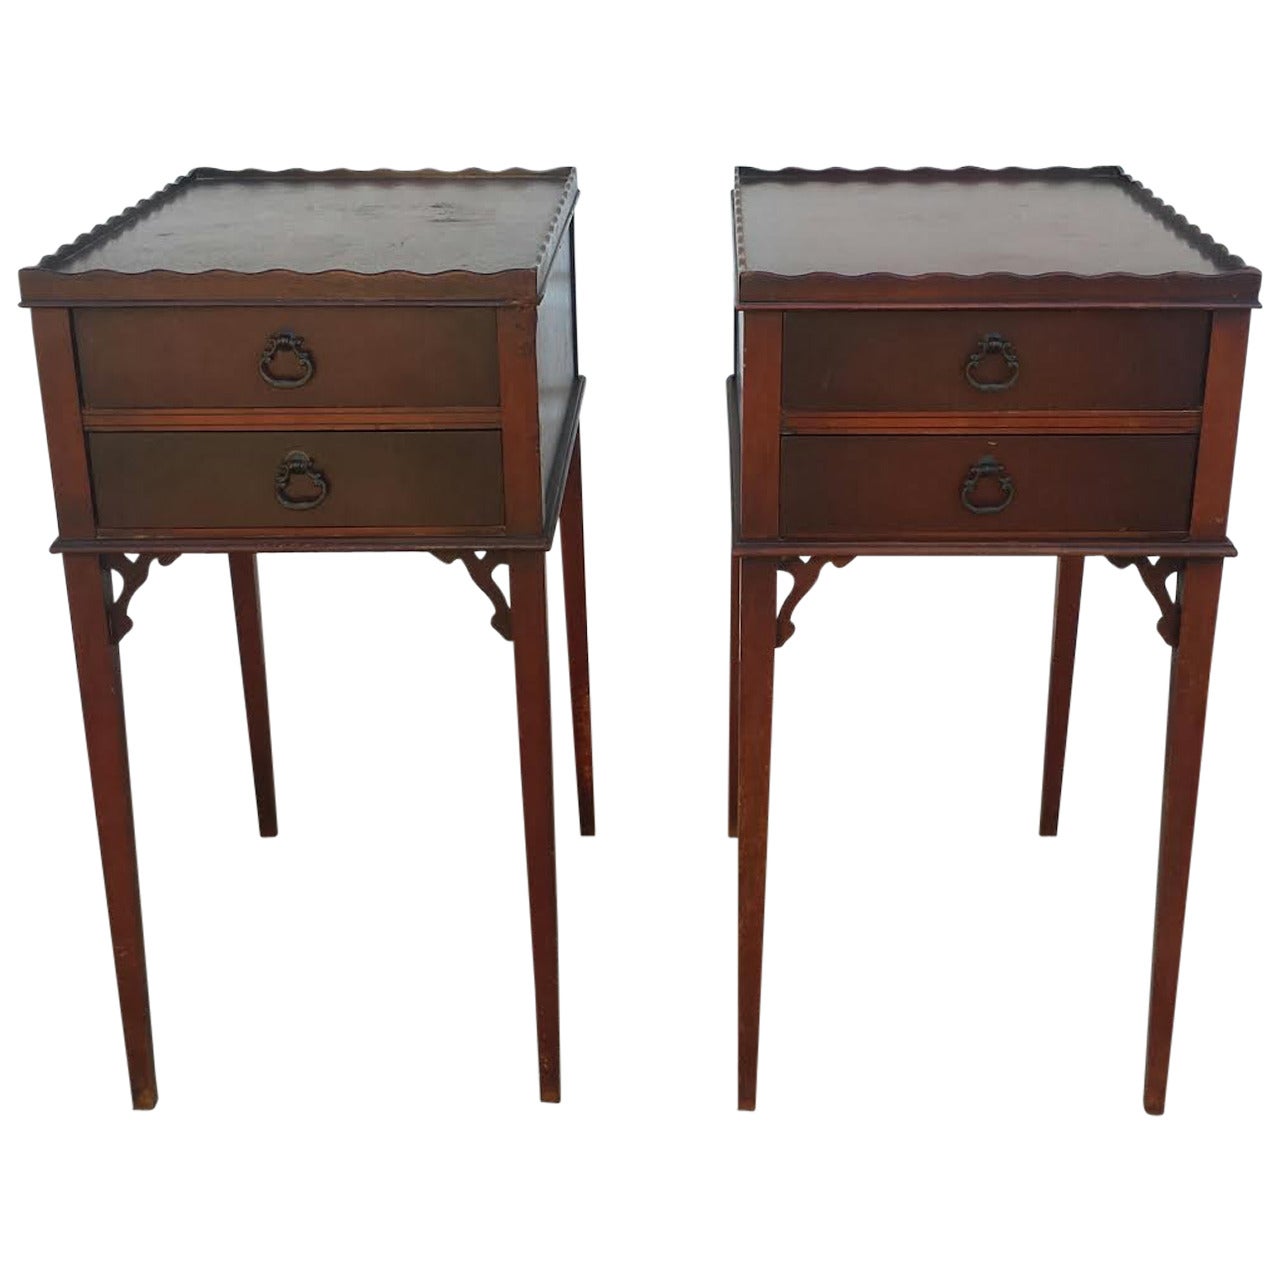 Pair of French Provincial Style Side Tables